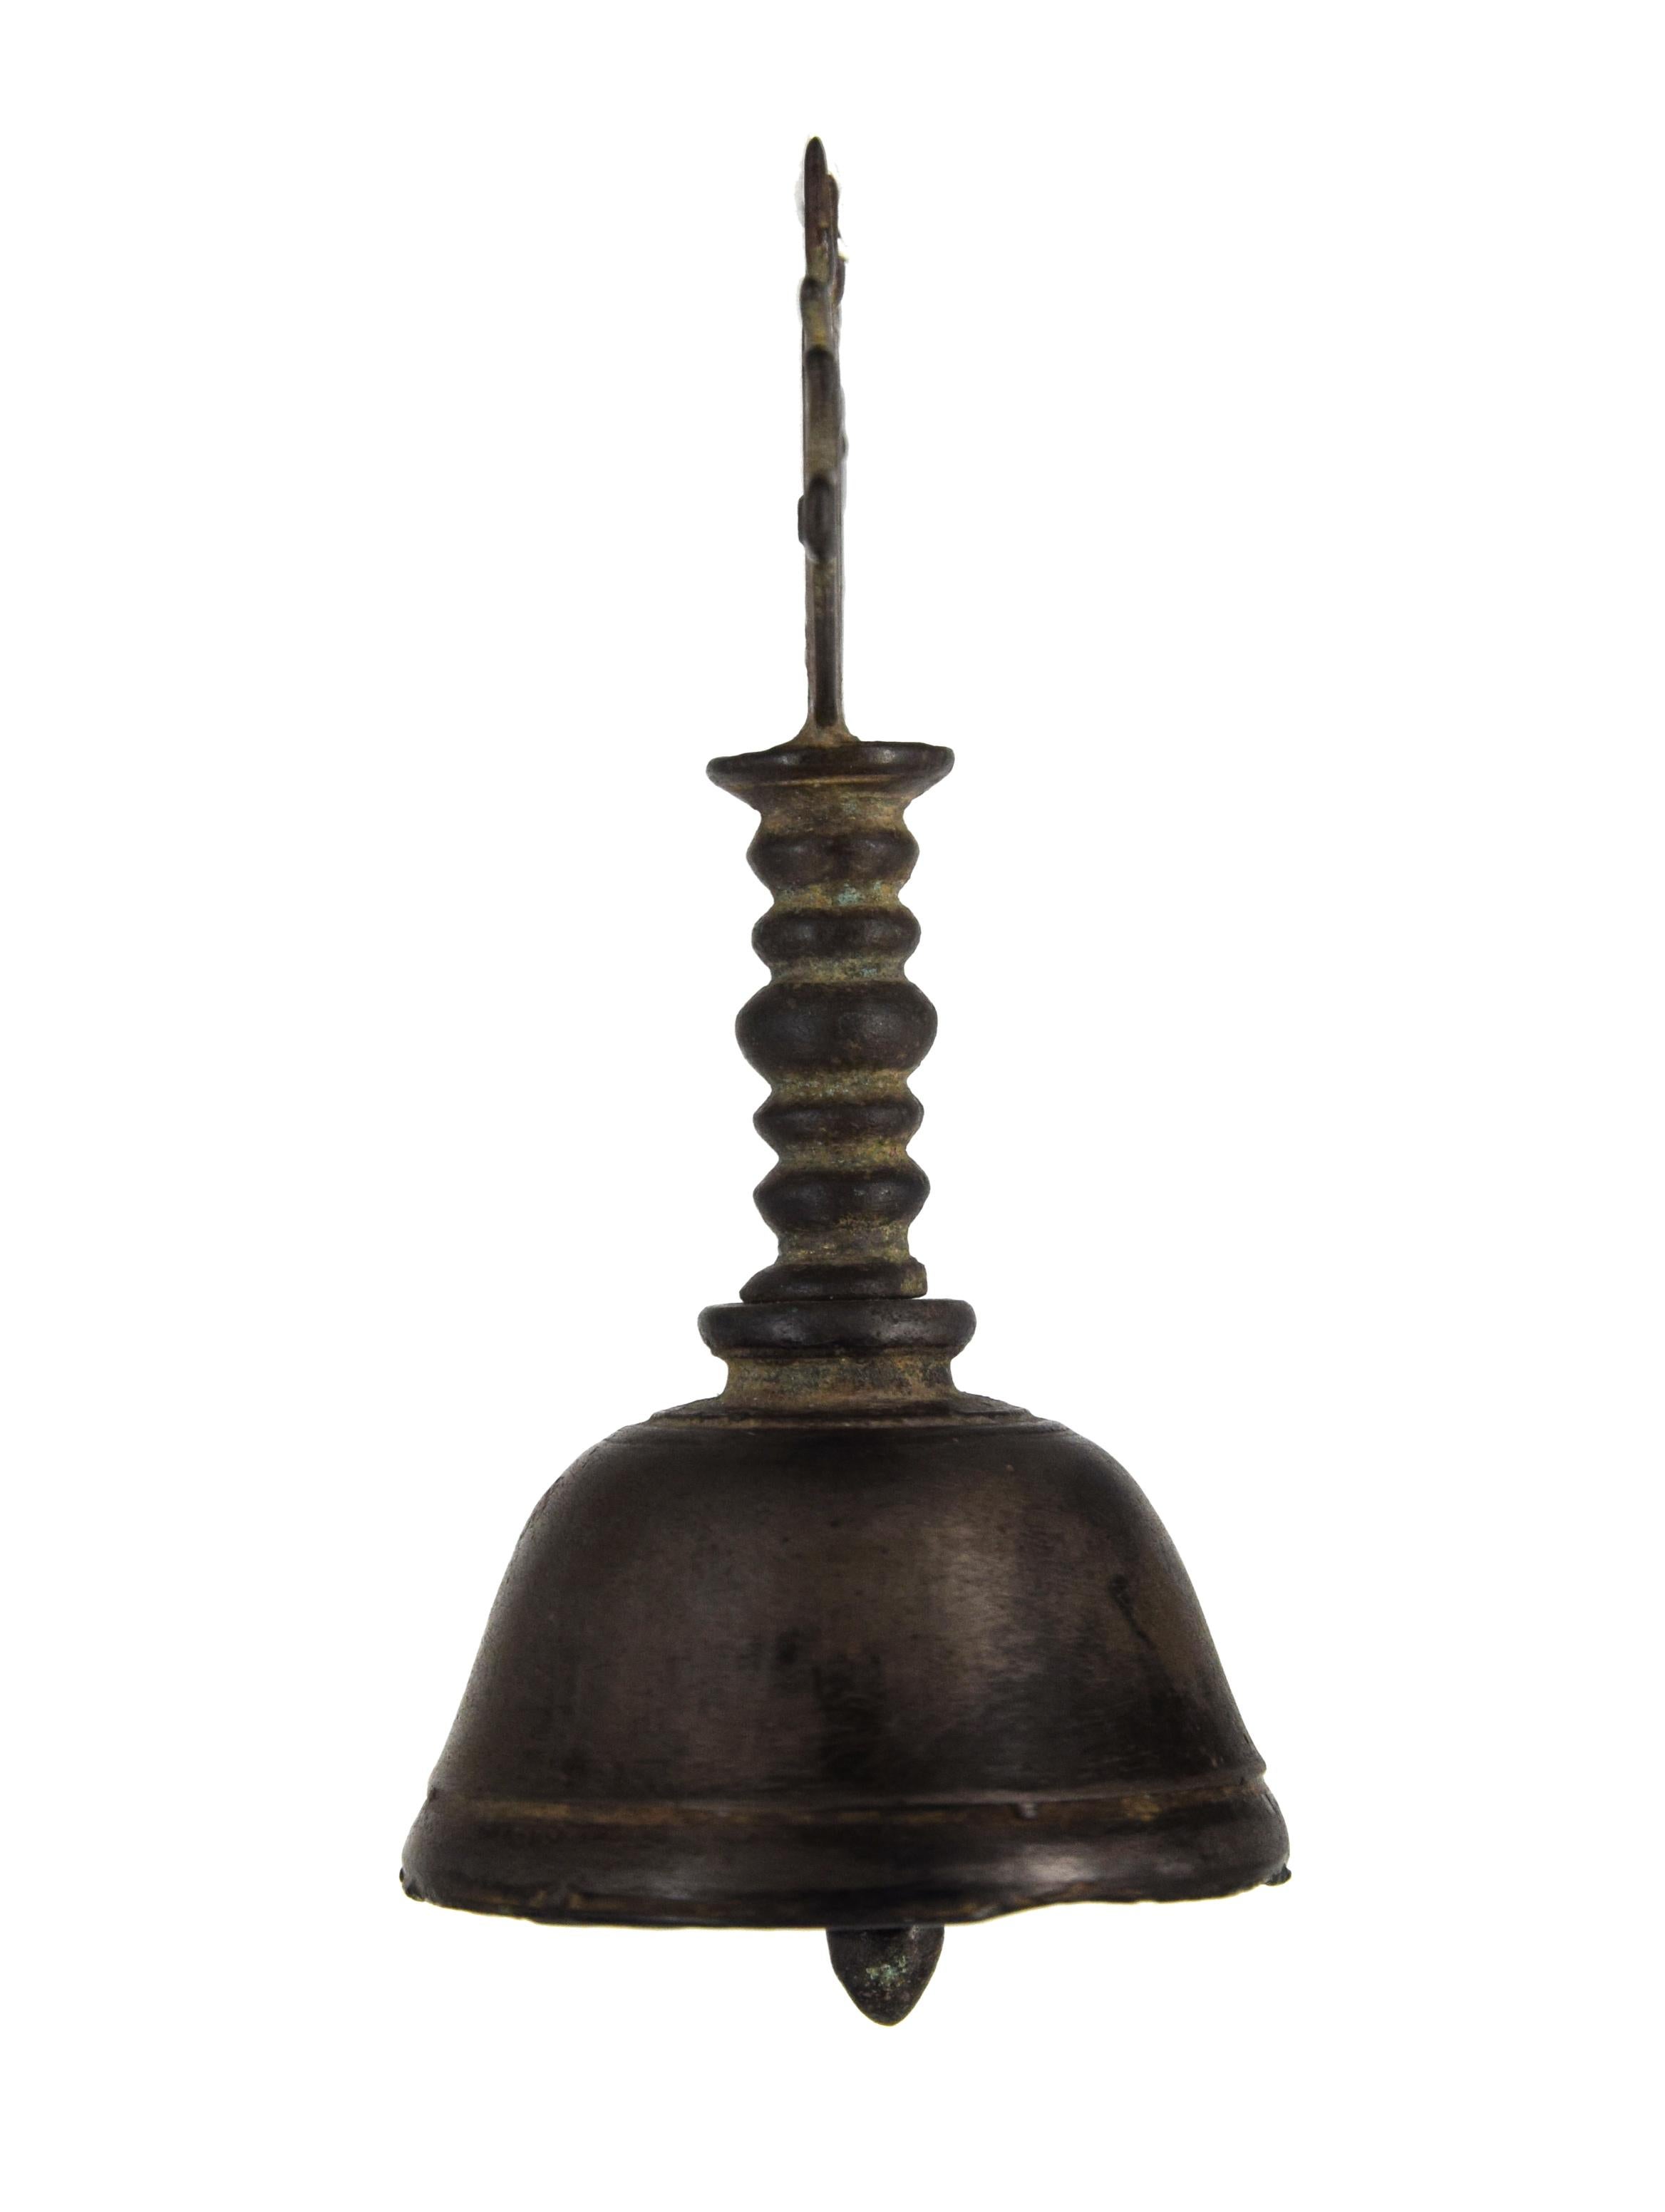 'Ghanta' bell from Indonesian temple in bronze. The finial of the handle has a round shape. Wavy segments on the outside and a cross on the inside were applied.
A similar bell is in the Asian Art Museum di San Francisco (inv. n. 2010.551).

This